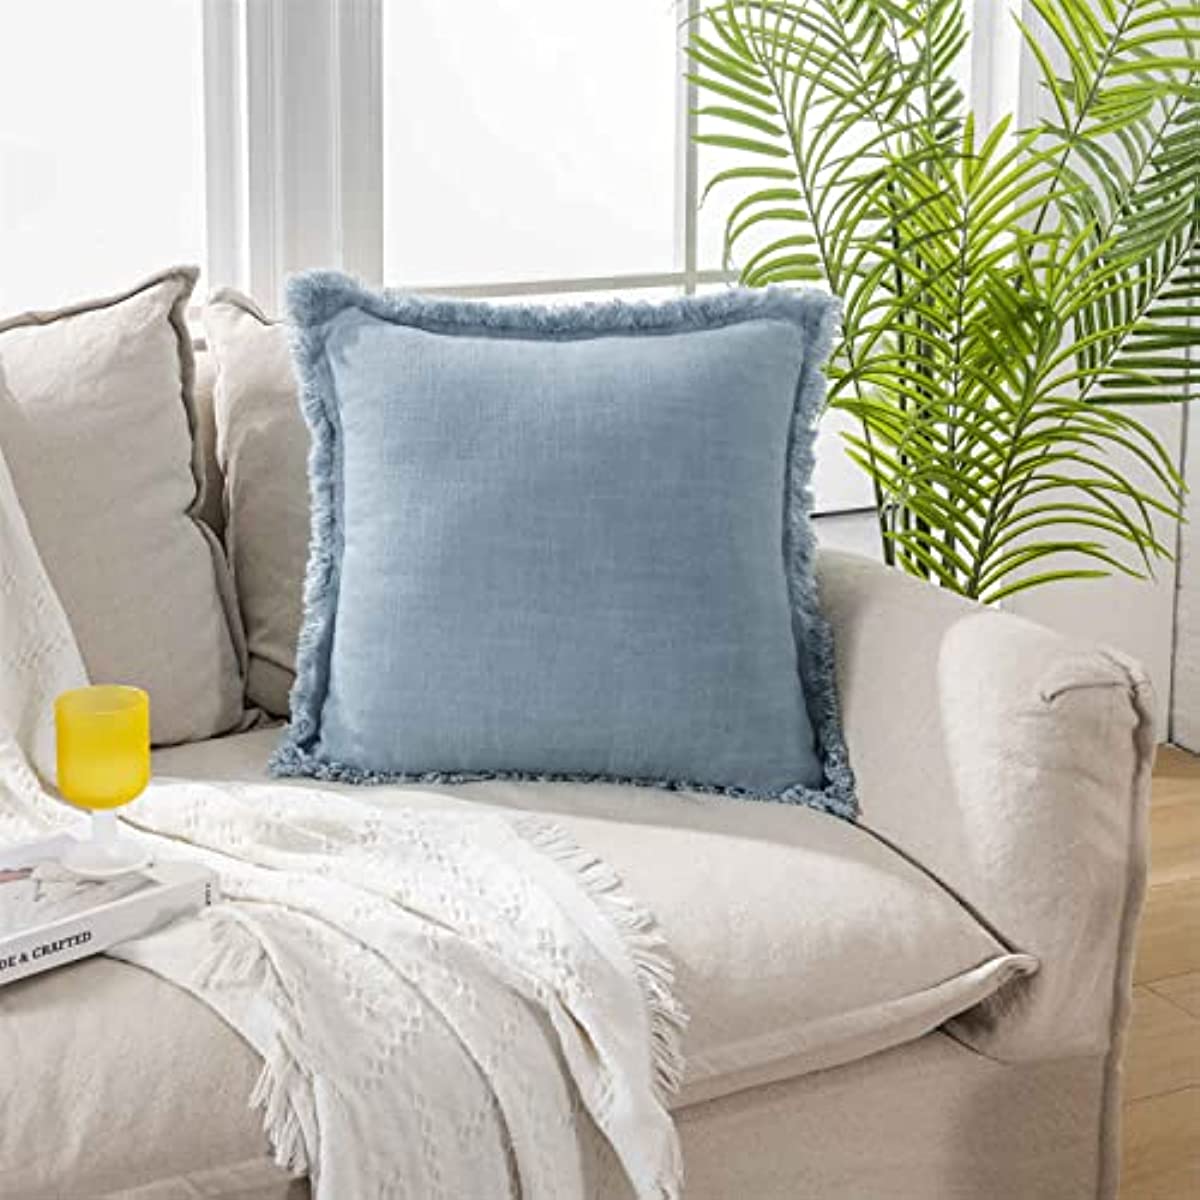 Anhome Decorative Throw Pillow Case Set - Decorative Cottage 18 x 18 Inch Pillow Case Linen Bohemian Cushion Cover for Beds, Sofas, Outdoor Turquoise